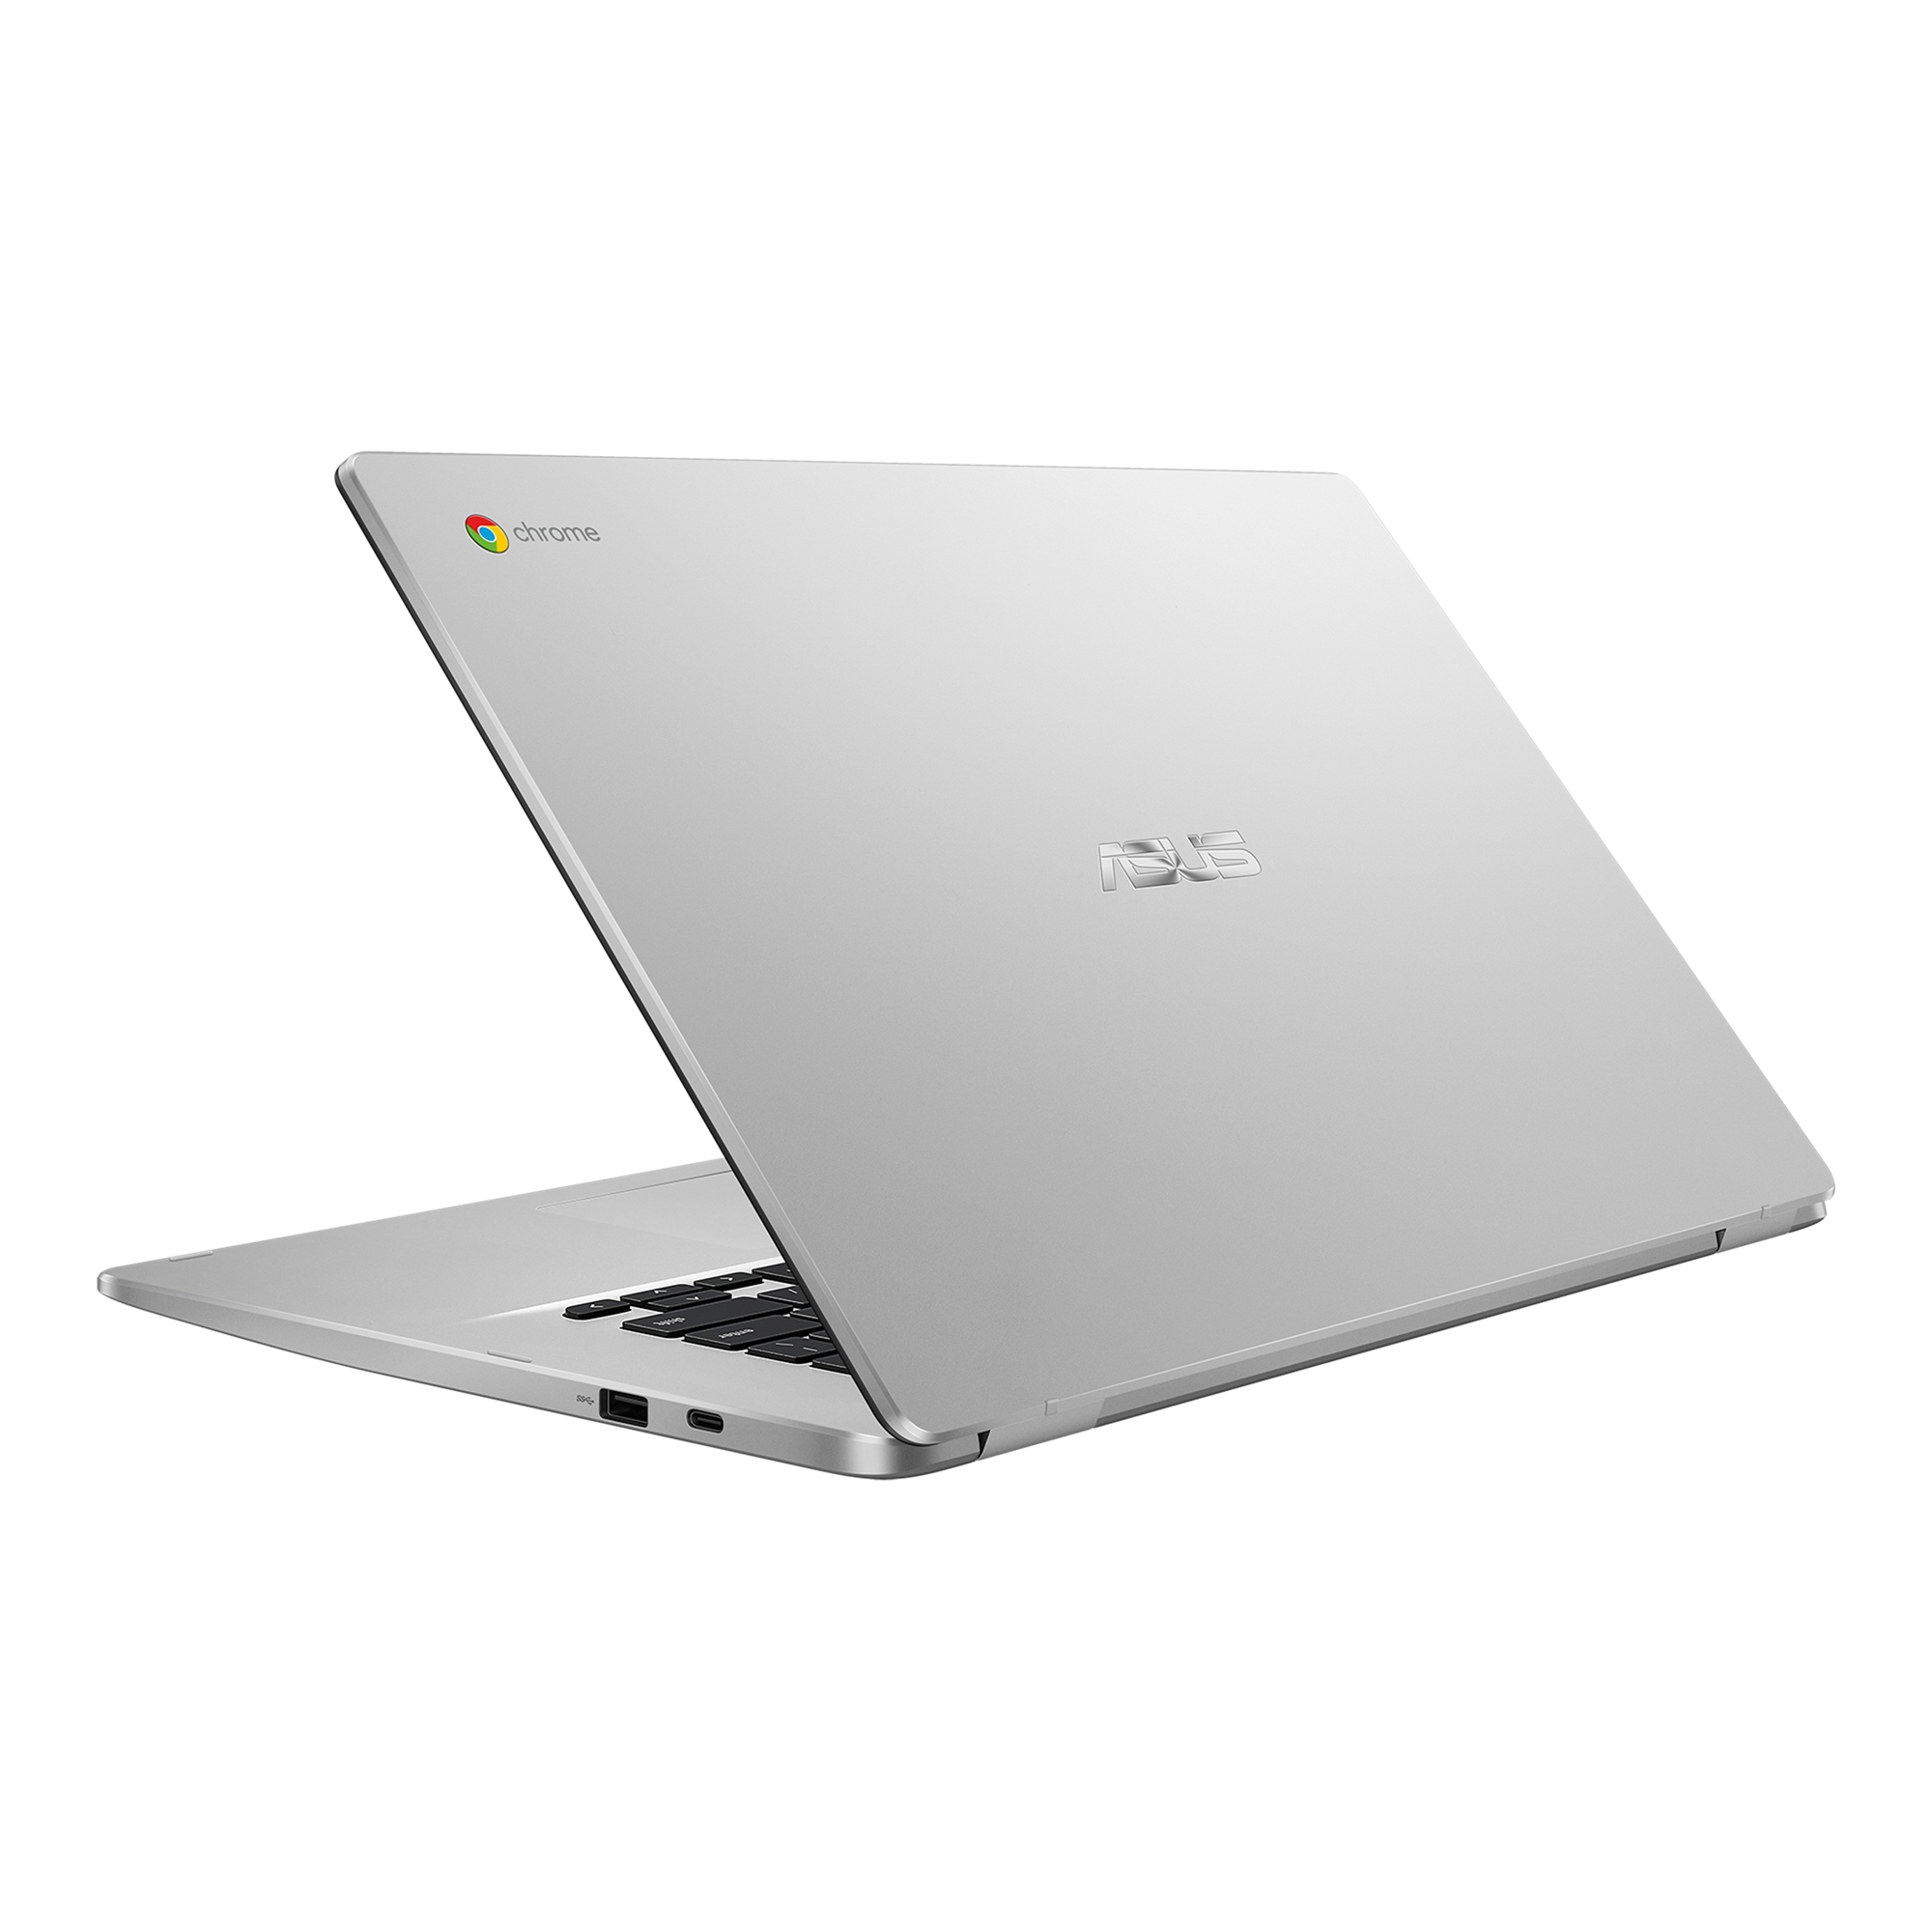 ASUS Chromebook C523｜Laptops For Work｜ASUS USA